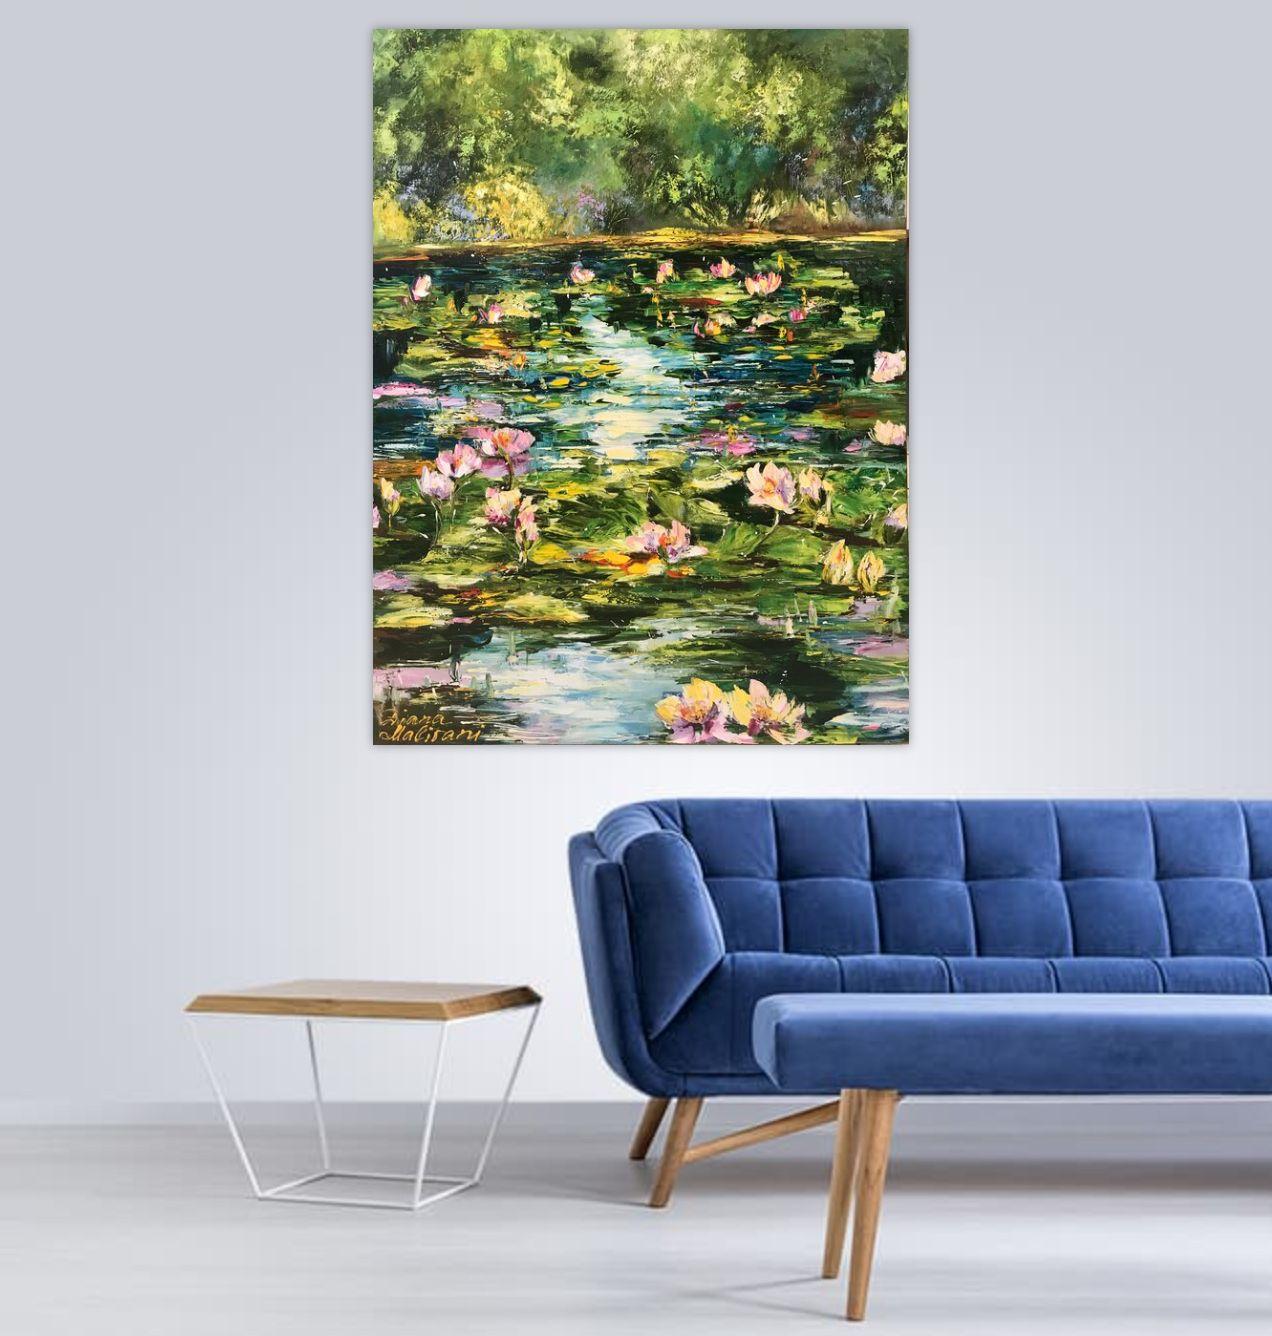 Pond with Water Lilies, Painting, Oil on Canvas 3